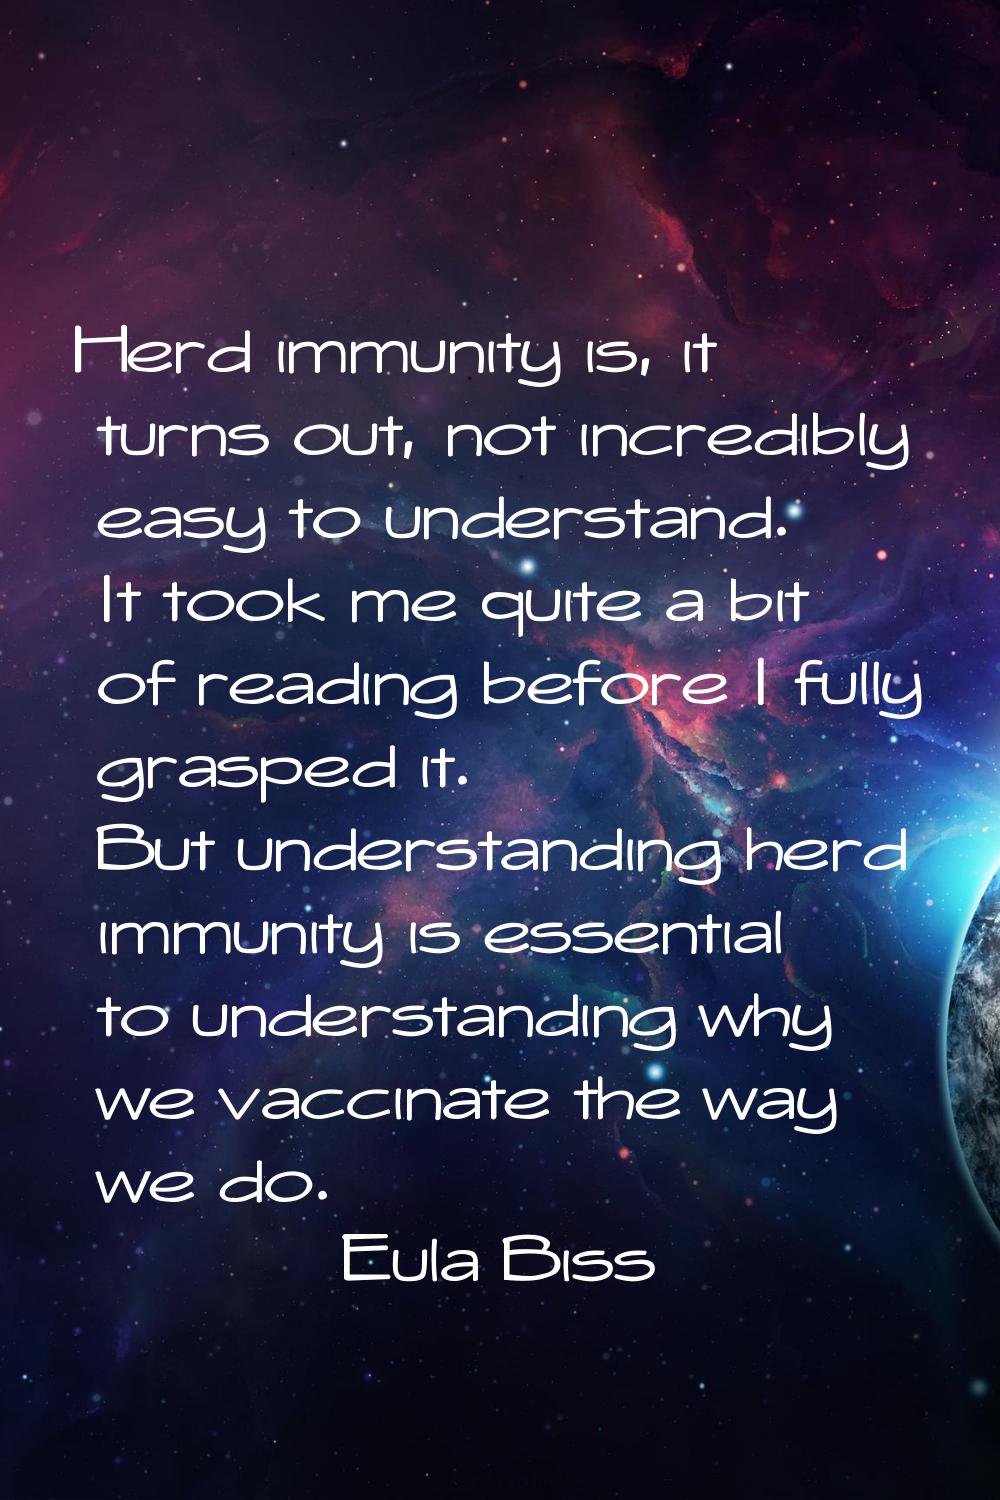 Herd immunity is, it turns out, not incredibly easy to understand. It took me quite a bit of readin